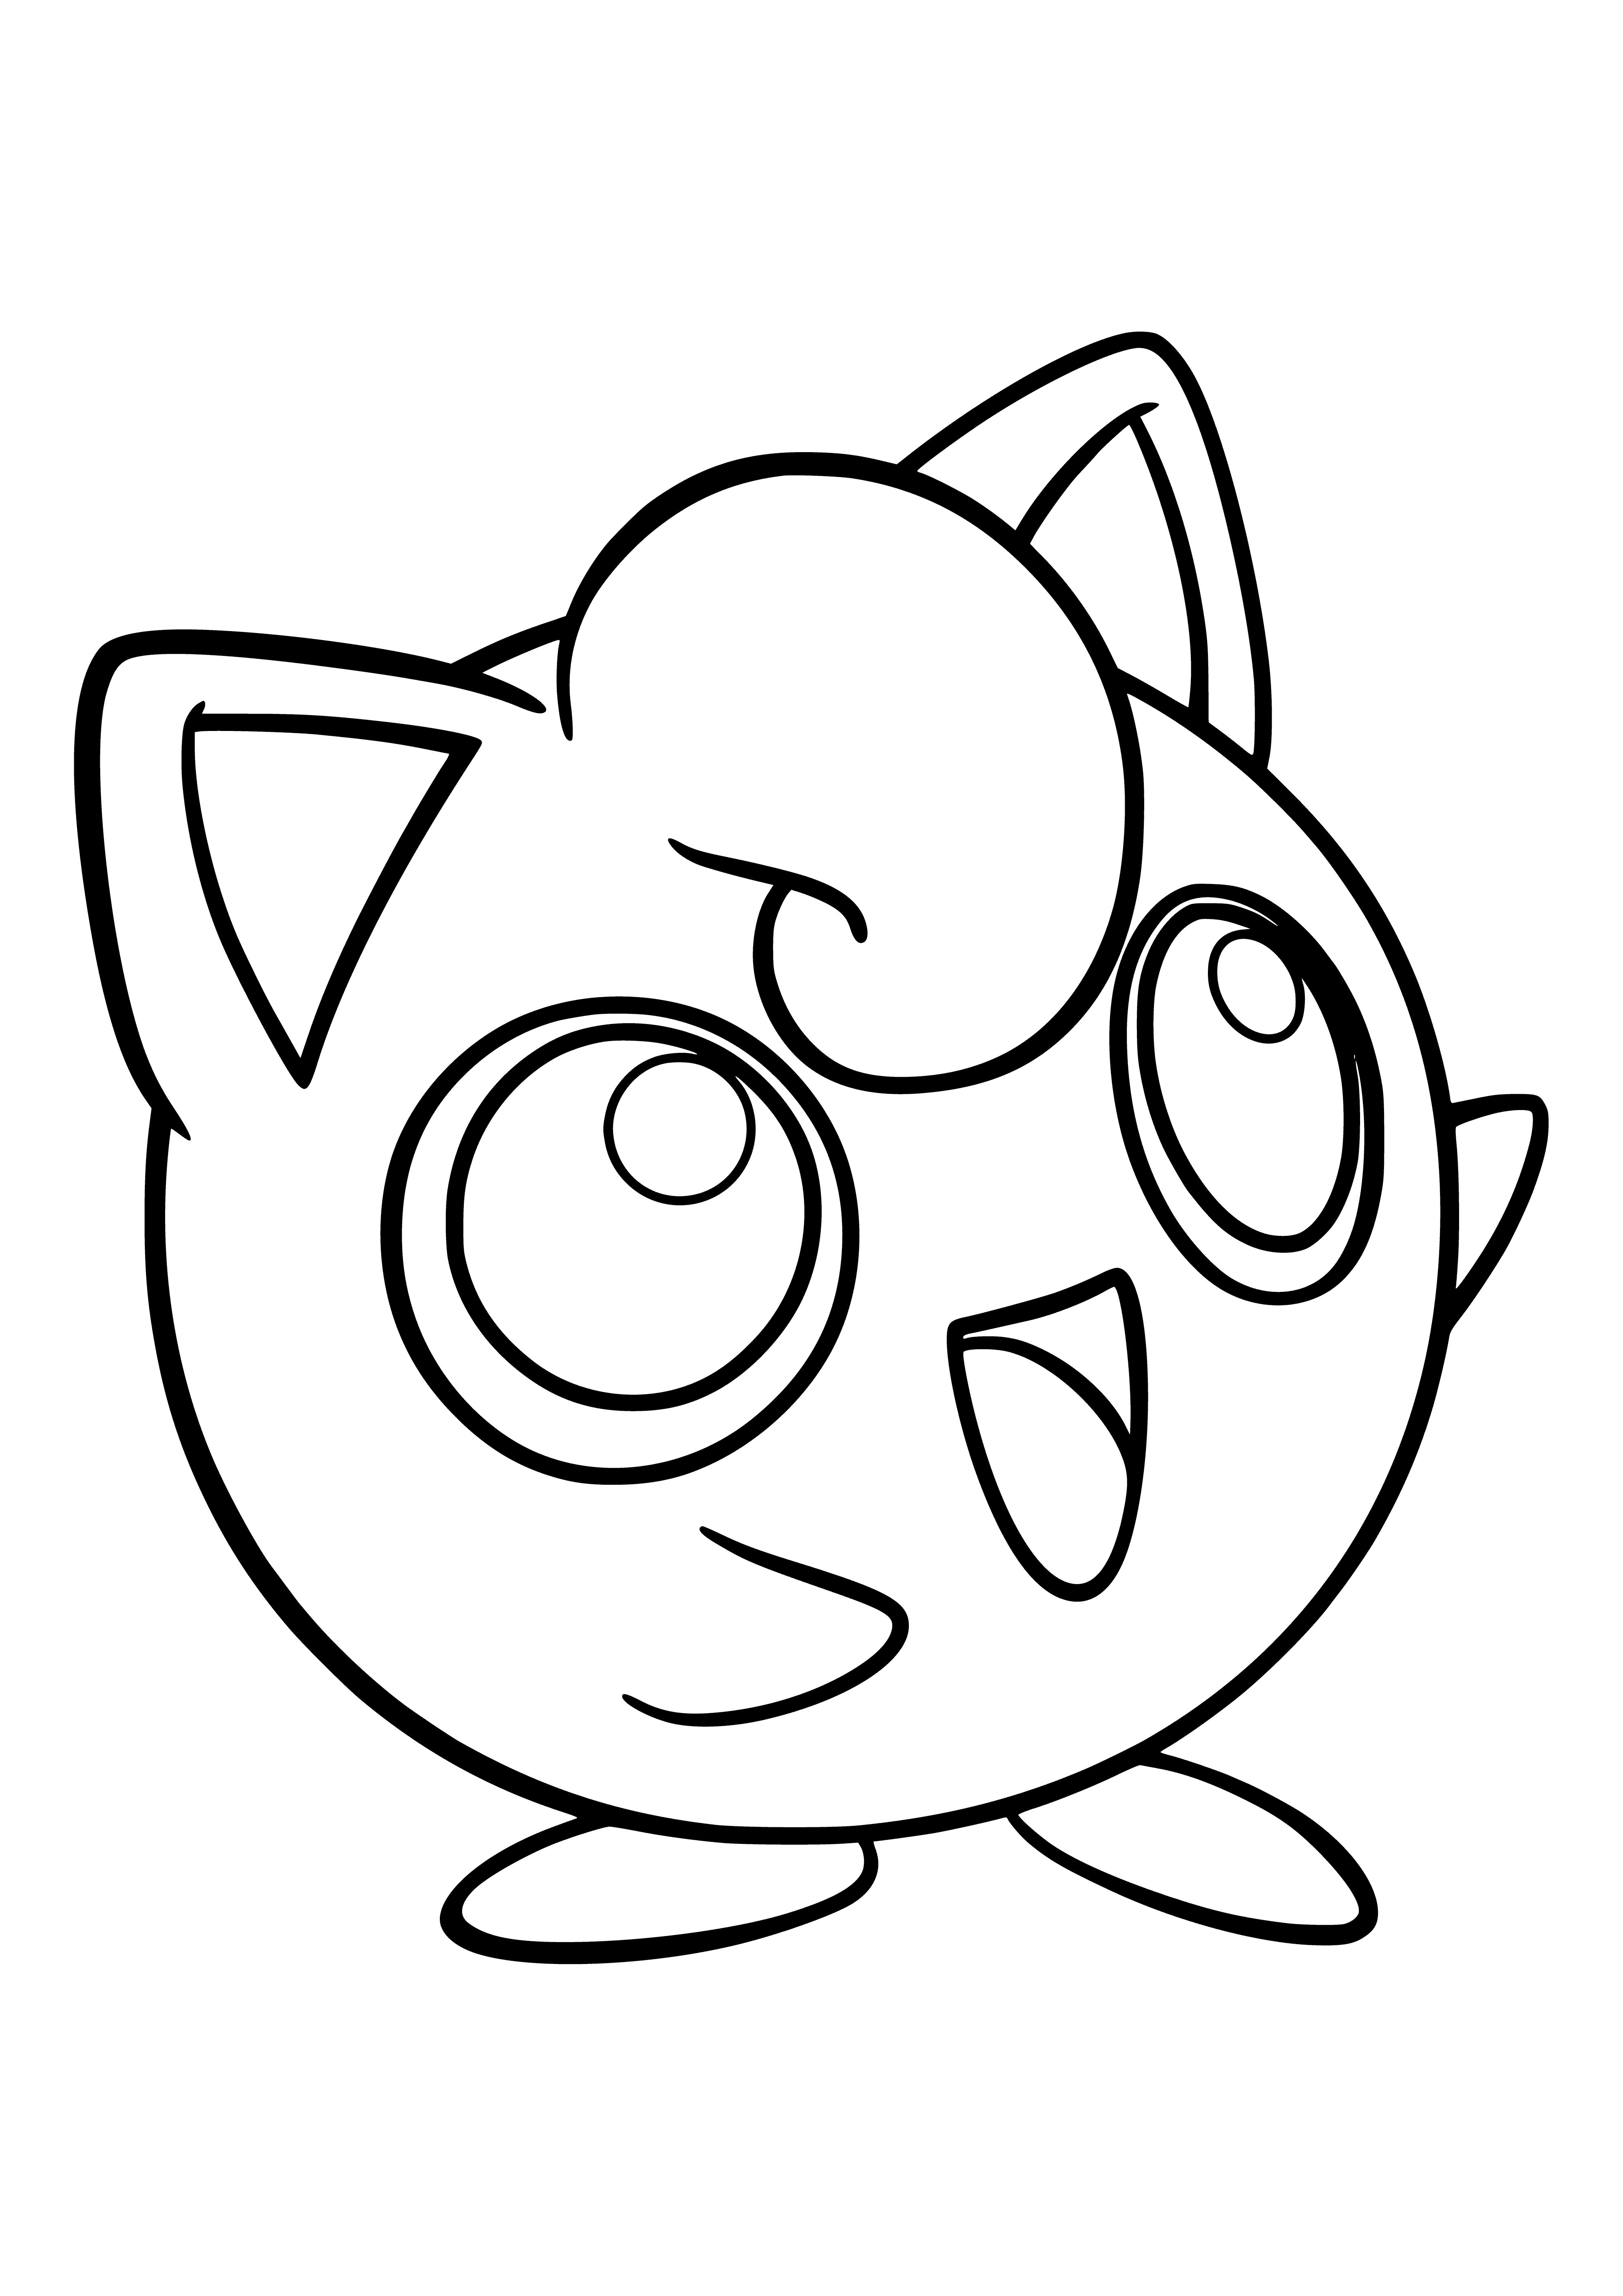 coloring page: Jigglypuff is a pink balloon-like Pokemon with fluffy white fur, horns & pointed tail. When it sings, its listeners fall asleep. #Pokemon